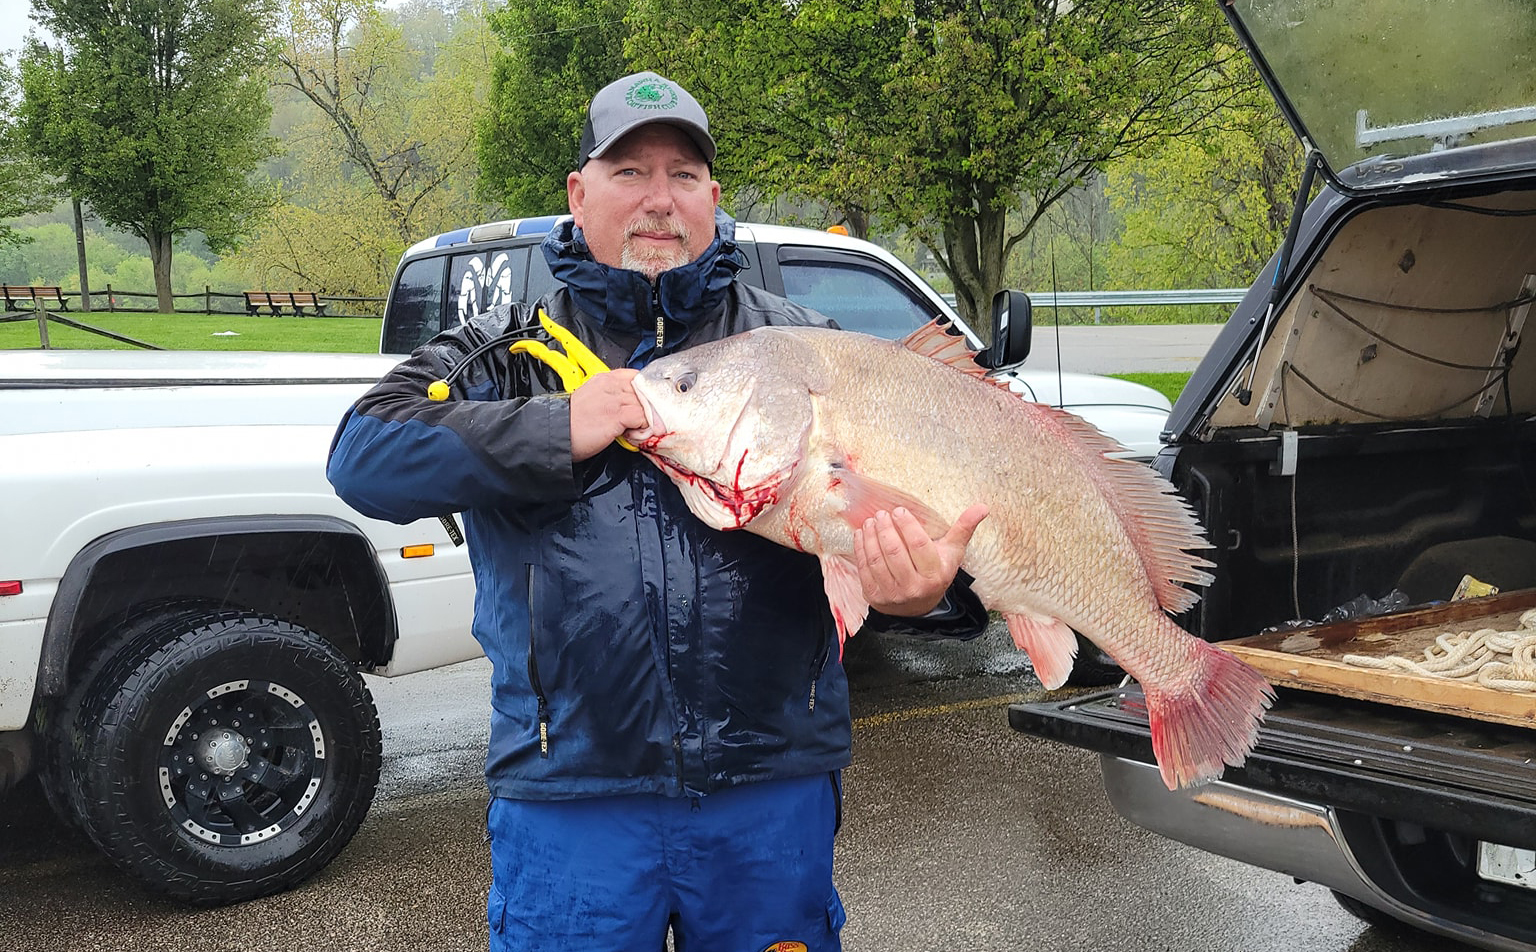 The new West-Virginia state-record drum weighed close to 30 pounds.